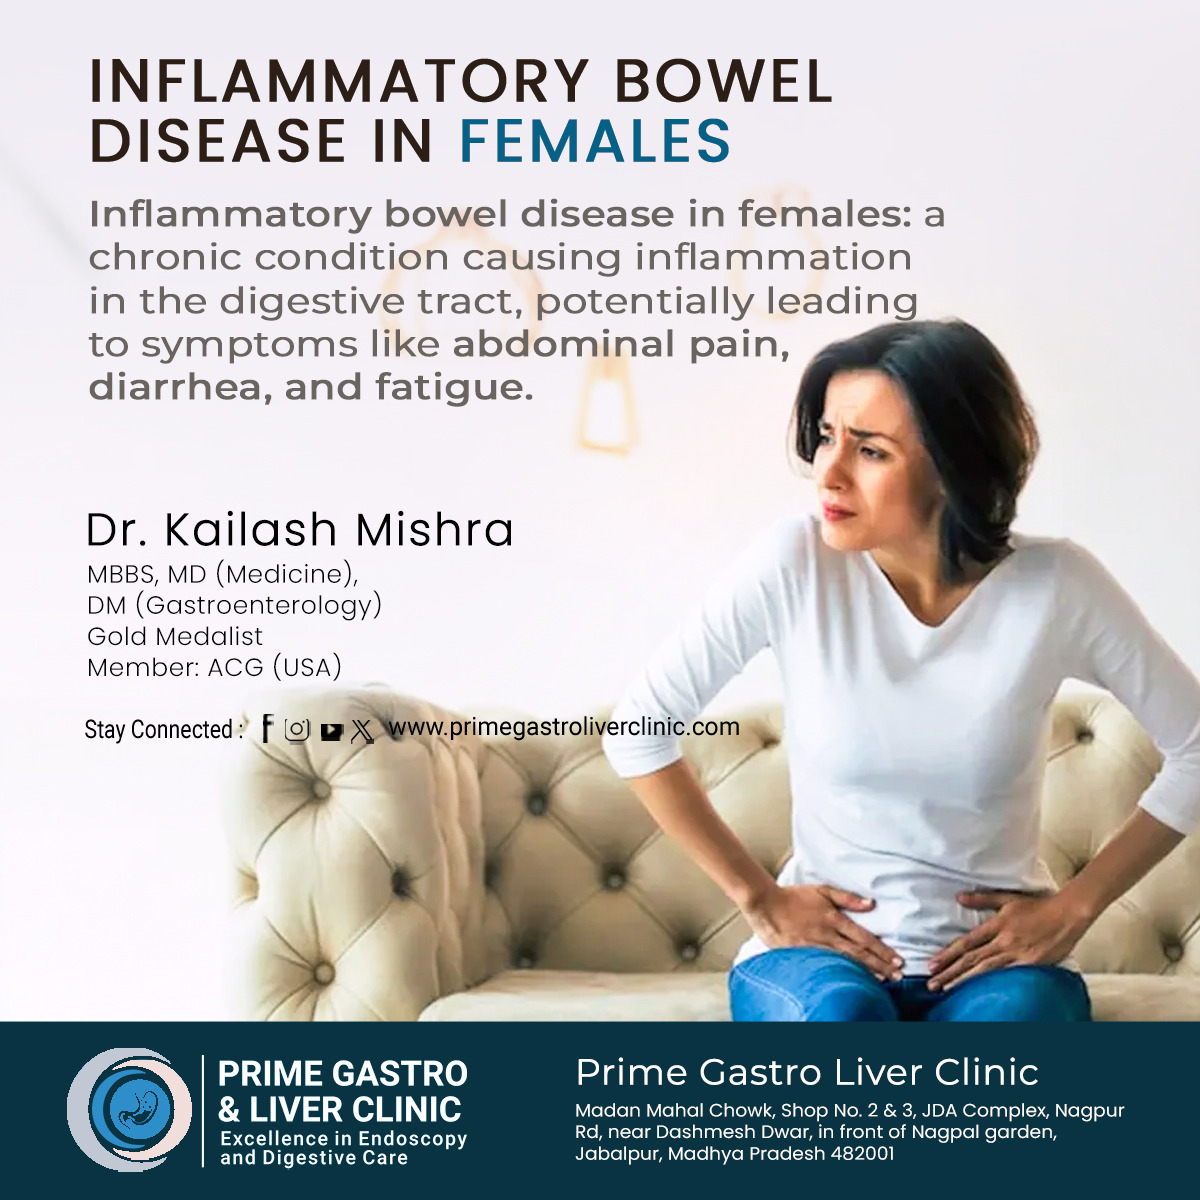 #Inflammatoryboweldisease (IBD) is a group of disorders that cause #chronic inflammation in the digestive tract. In #females, IBD can affect the #intestines.

Read More: lnkd.in/dVfRk3BA, contact on 9826014491
#gastrointestinal #gastroenterology #health #femalemuscle